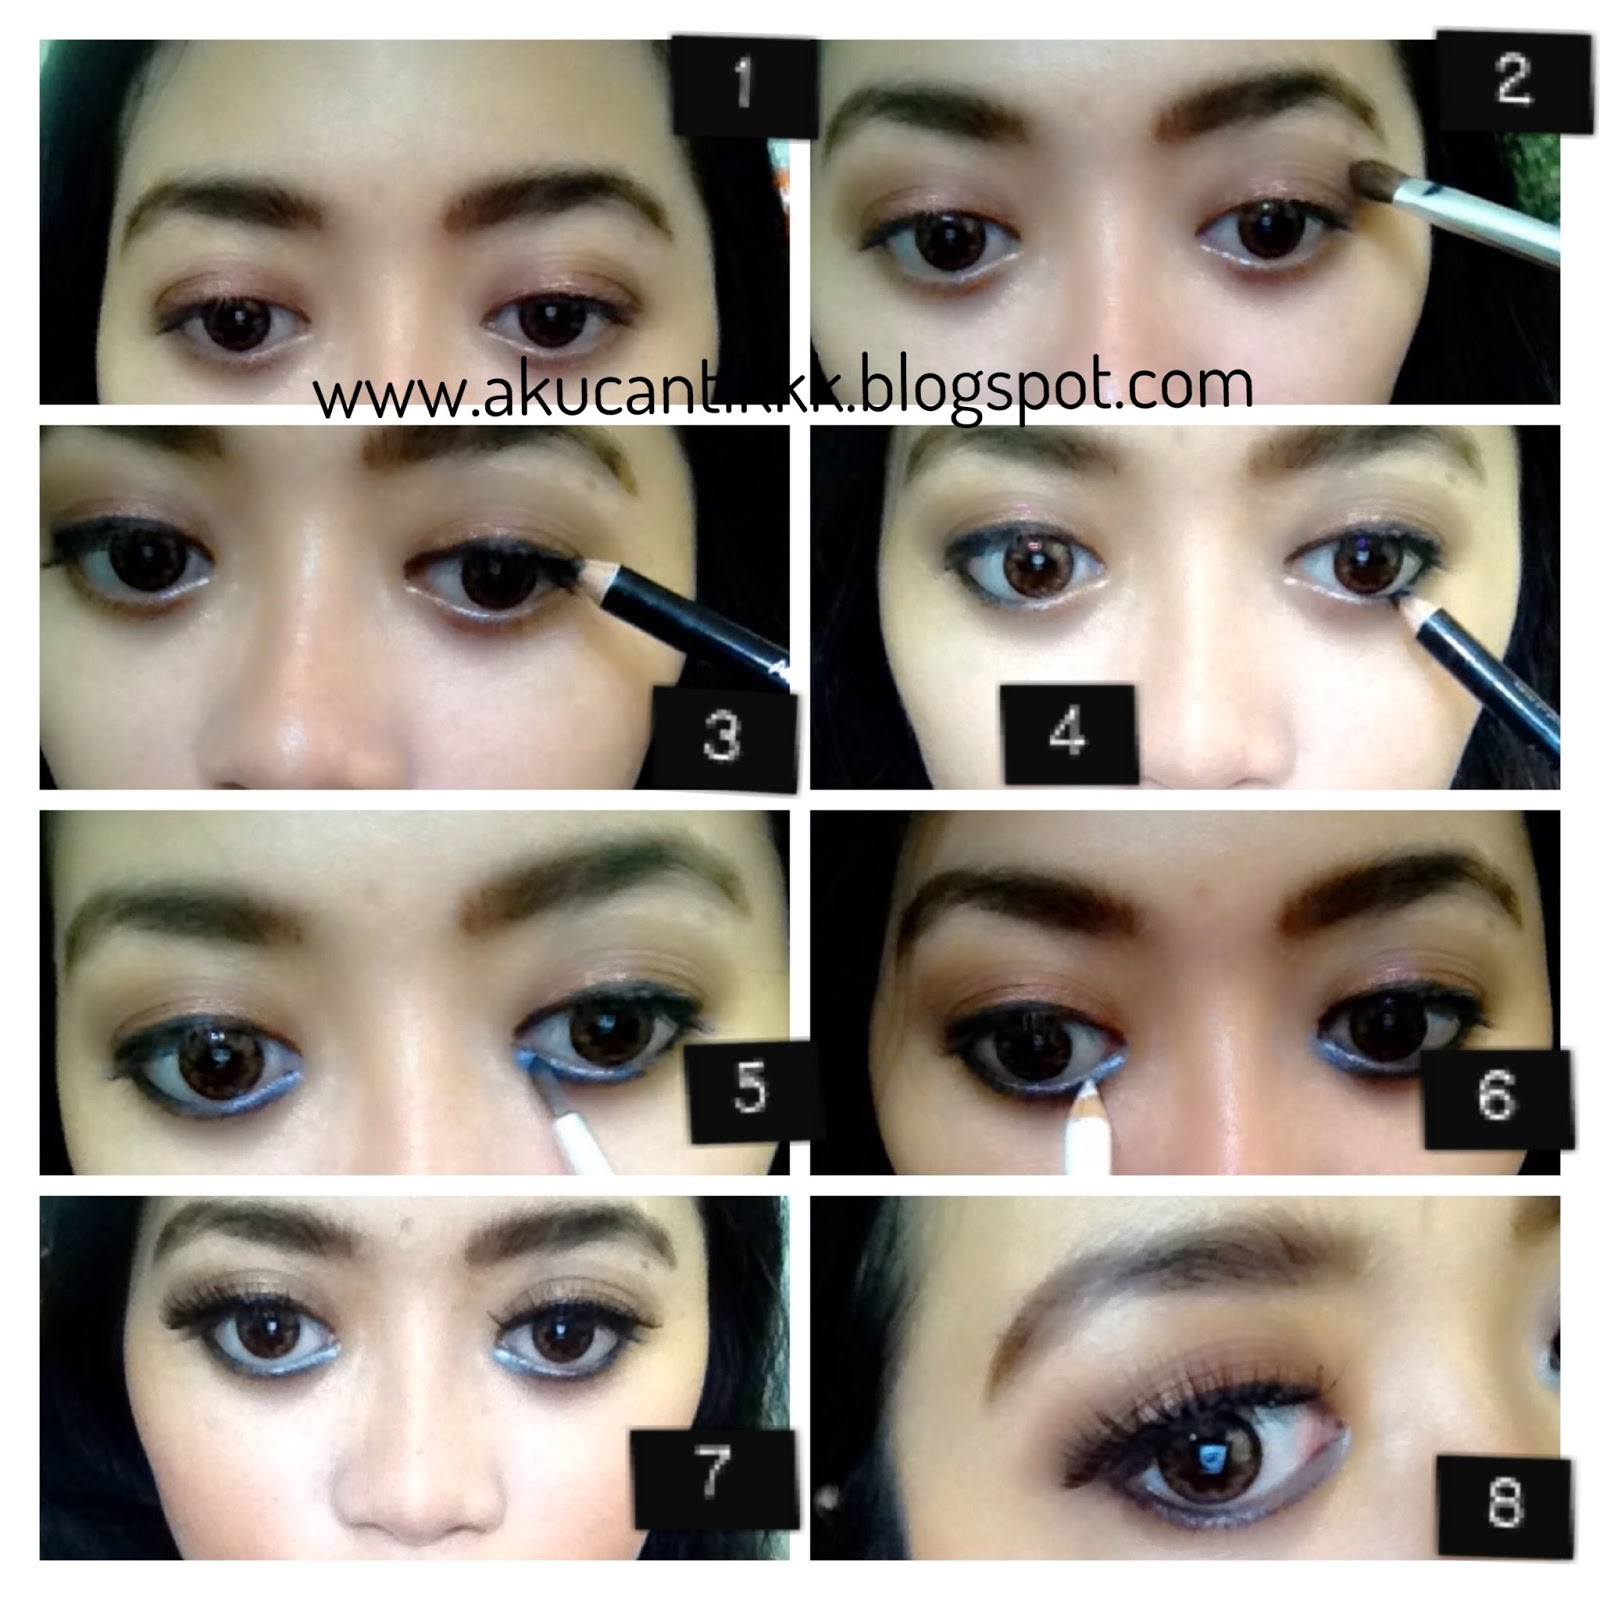 BALI BEAUTY BLOGGER PICTORIAL GOING TO THE OFFICE EYE MAKE UP